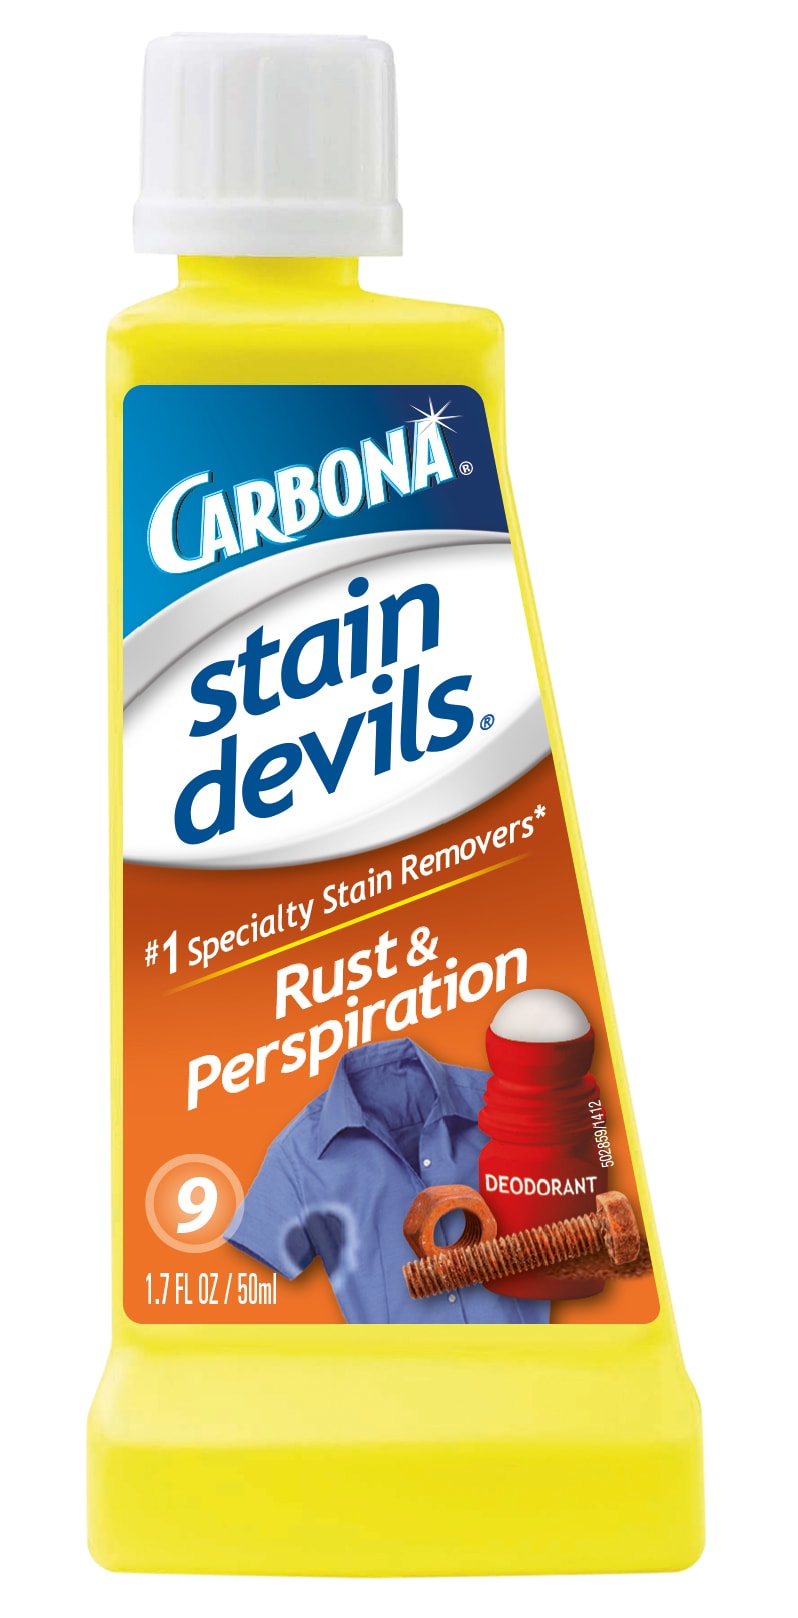 Carbona Stain Devil, Carbona Upholstery Cleaners, Carbona Stain Remover, Carbona  Spot Lifter, Carbona Cleaning